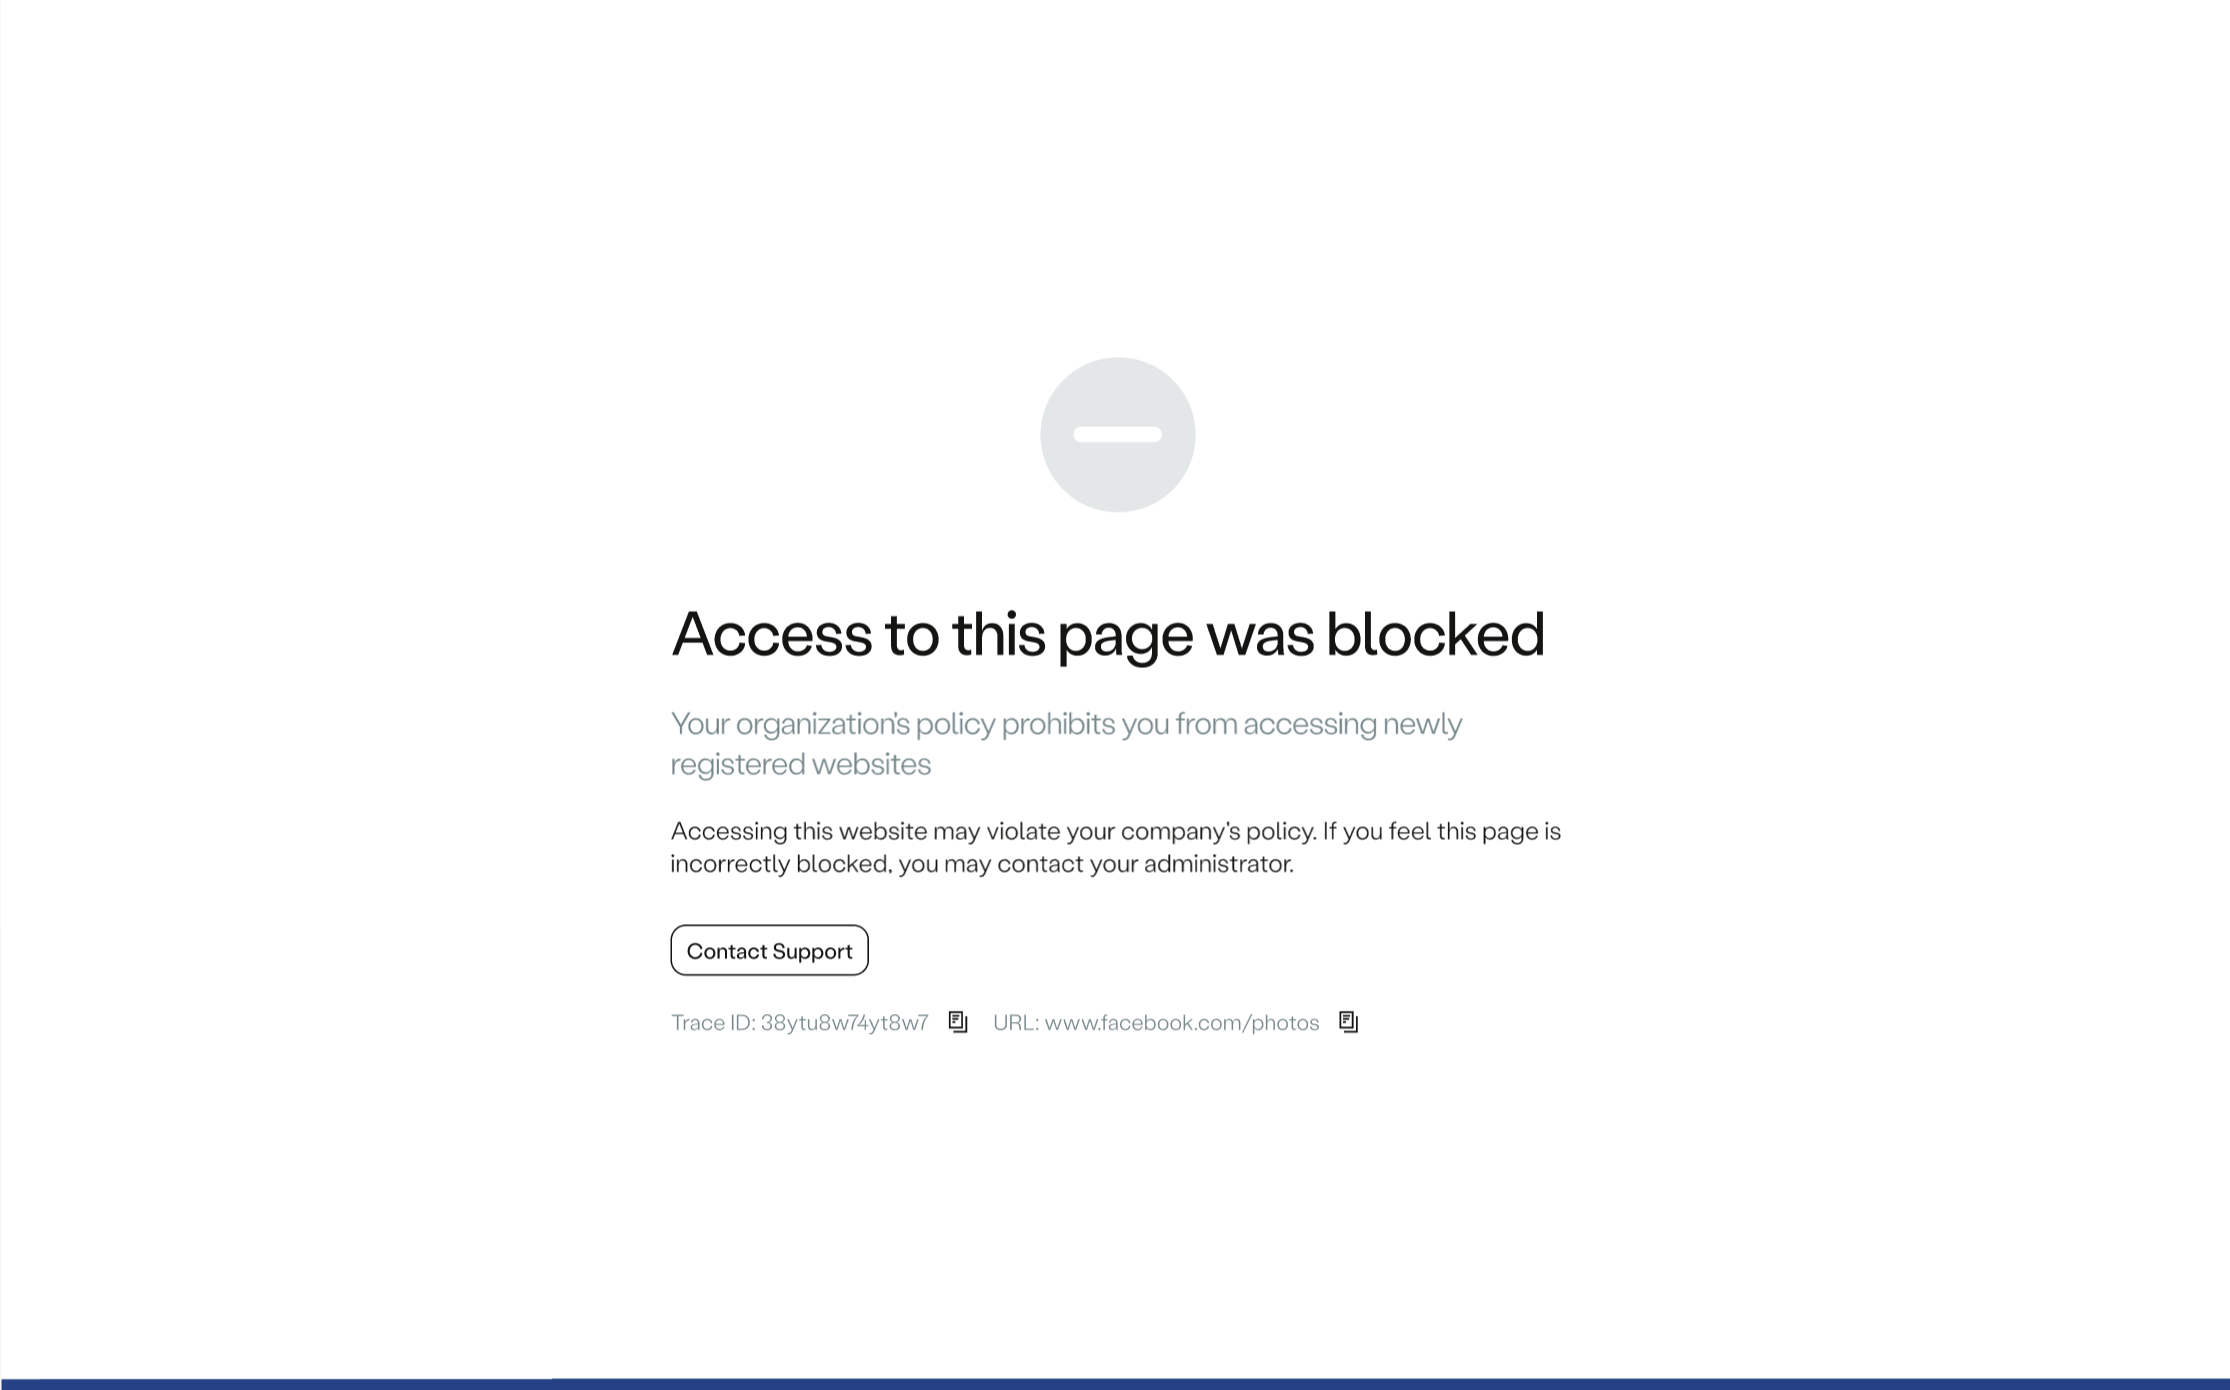 Access was blocked due to a newly registered domain